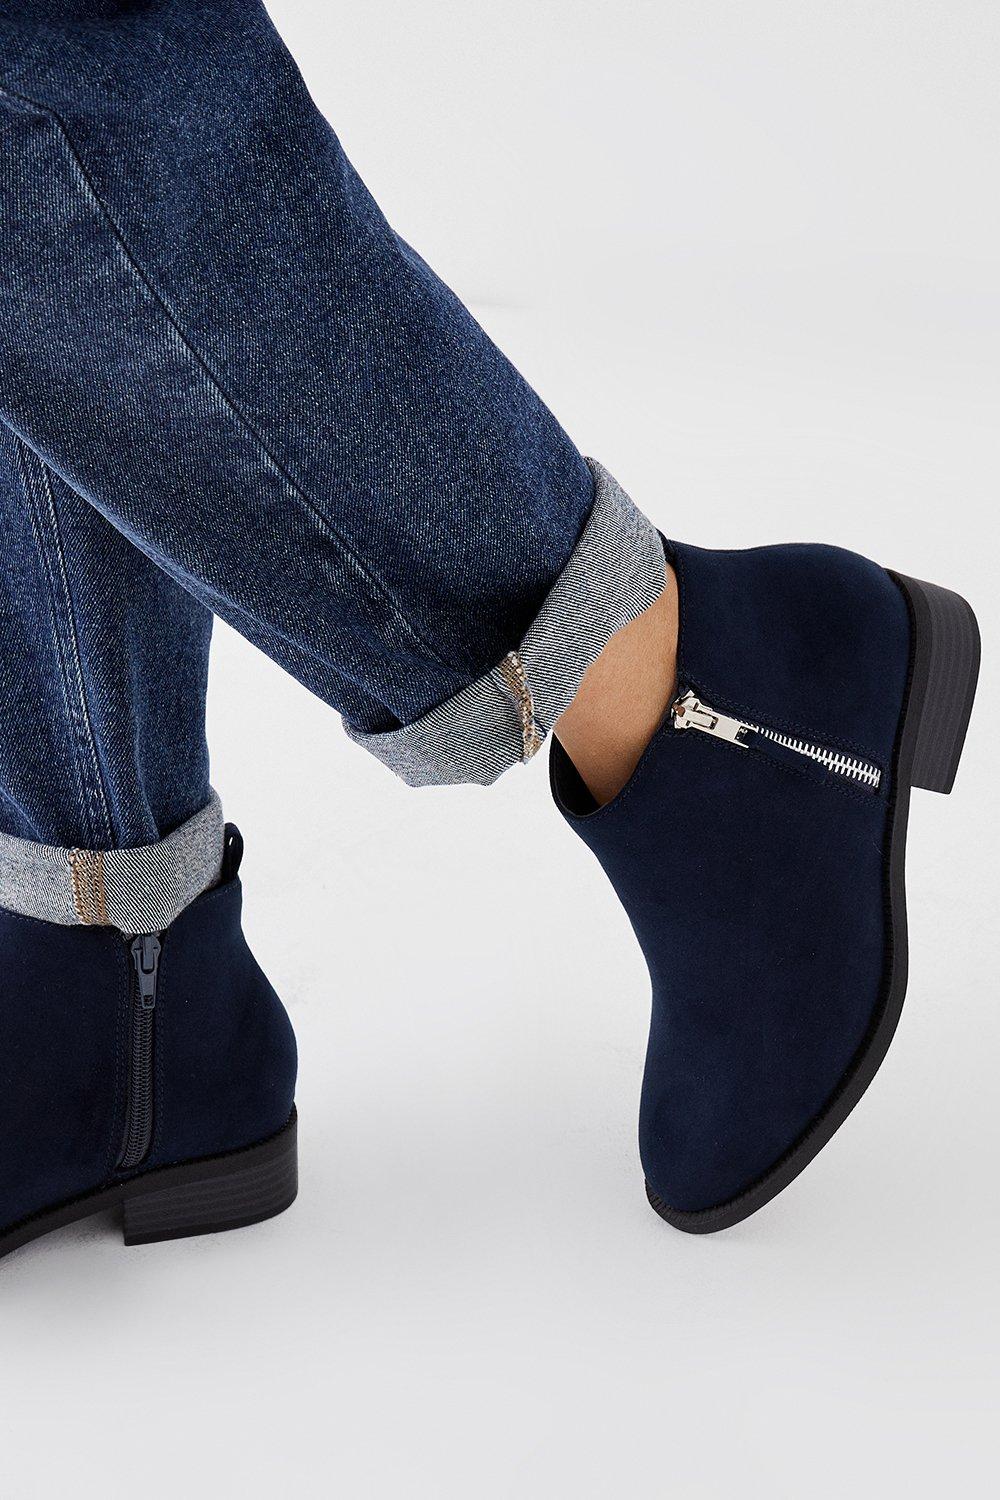 Women’s Madrid Zip Up Ankle Boots - navy - 6